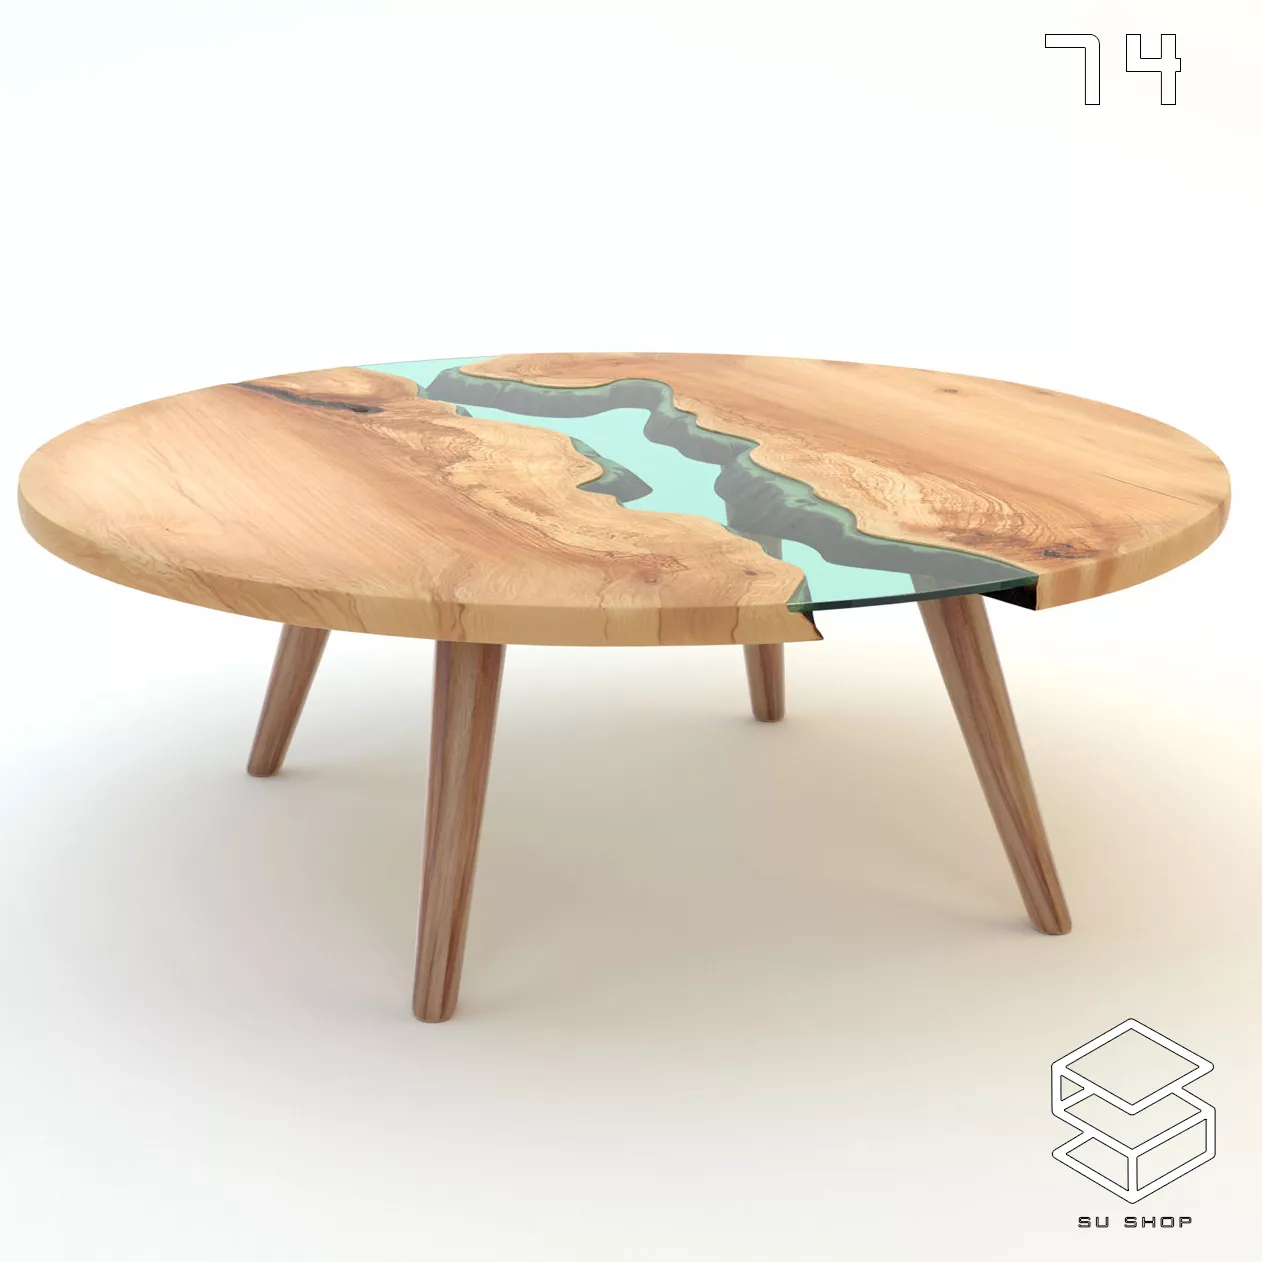 MODERN TEA TABLE - SKETCHUP 3D MODEL - VRAY OR ENSCAPE - ID15087